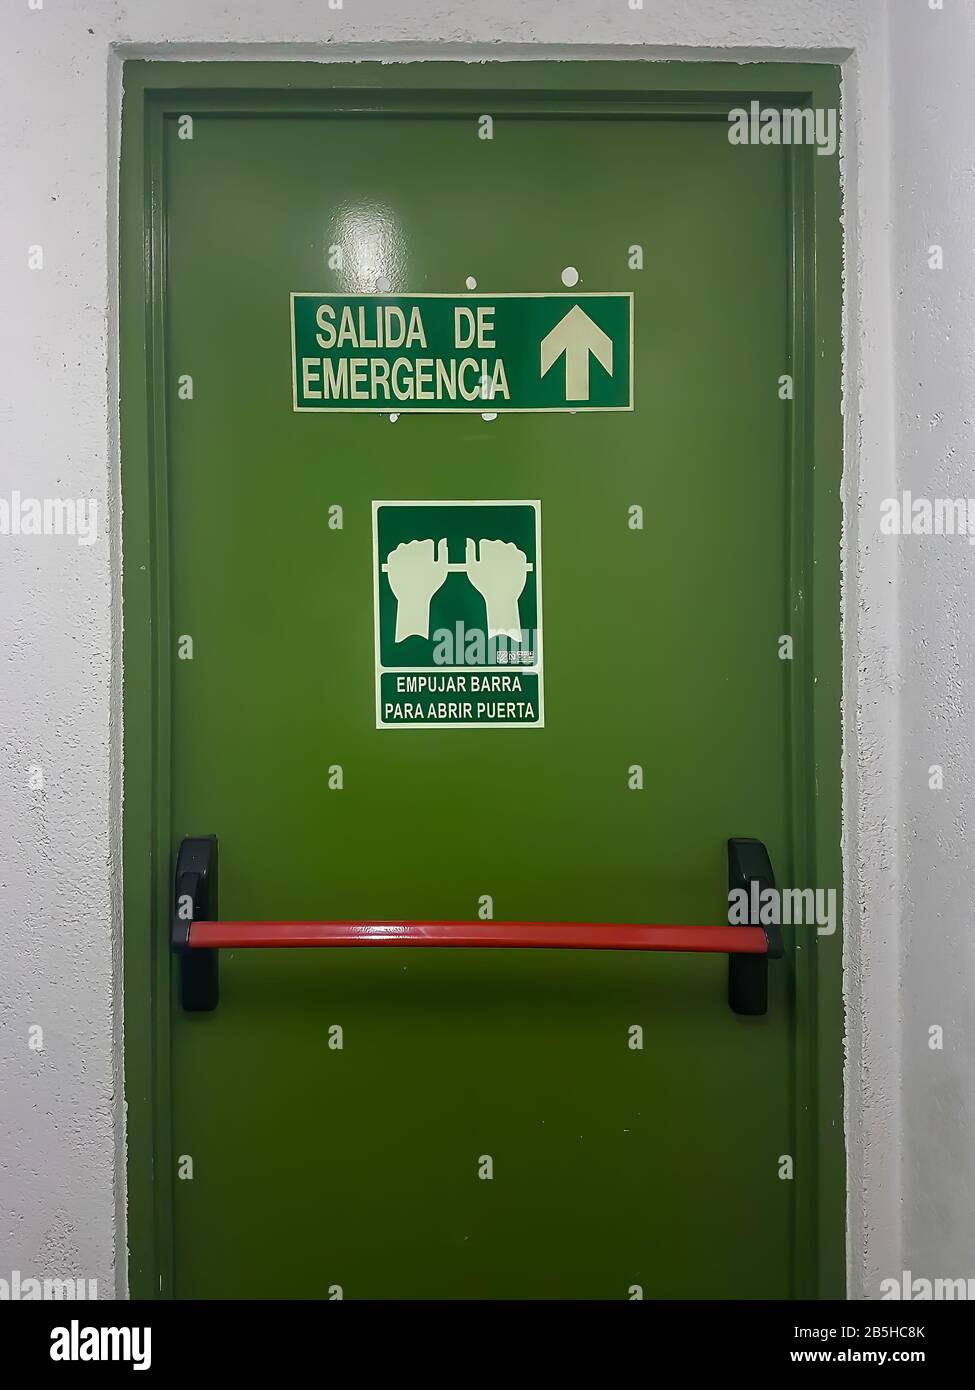 emergency exit with directions in Spanish Stock Photo